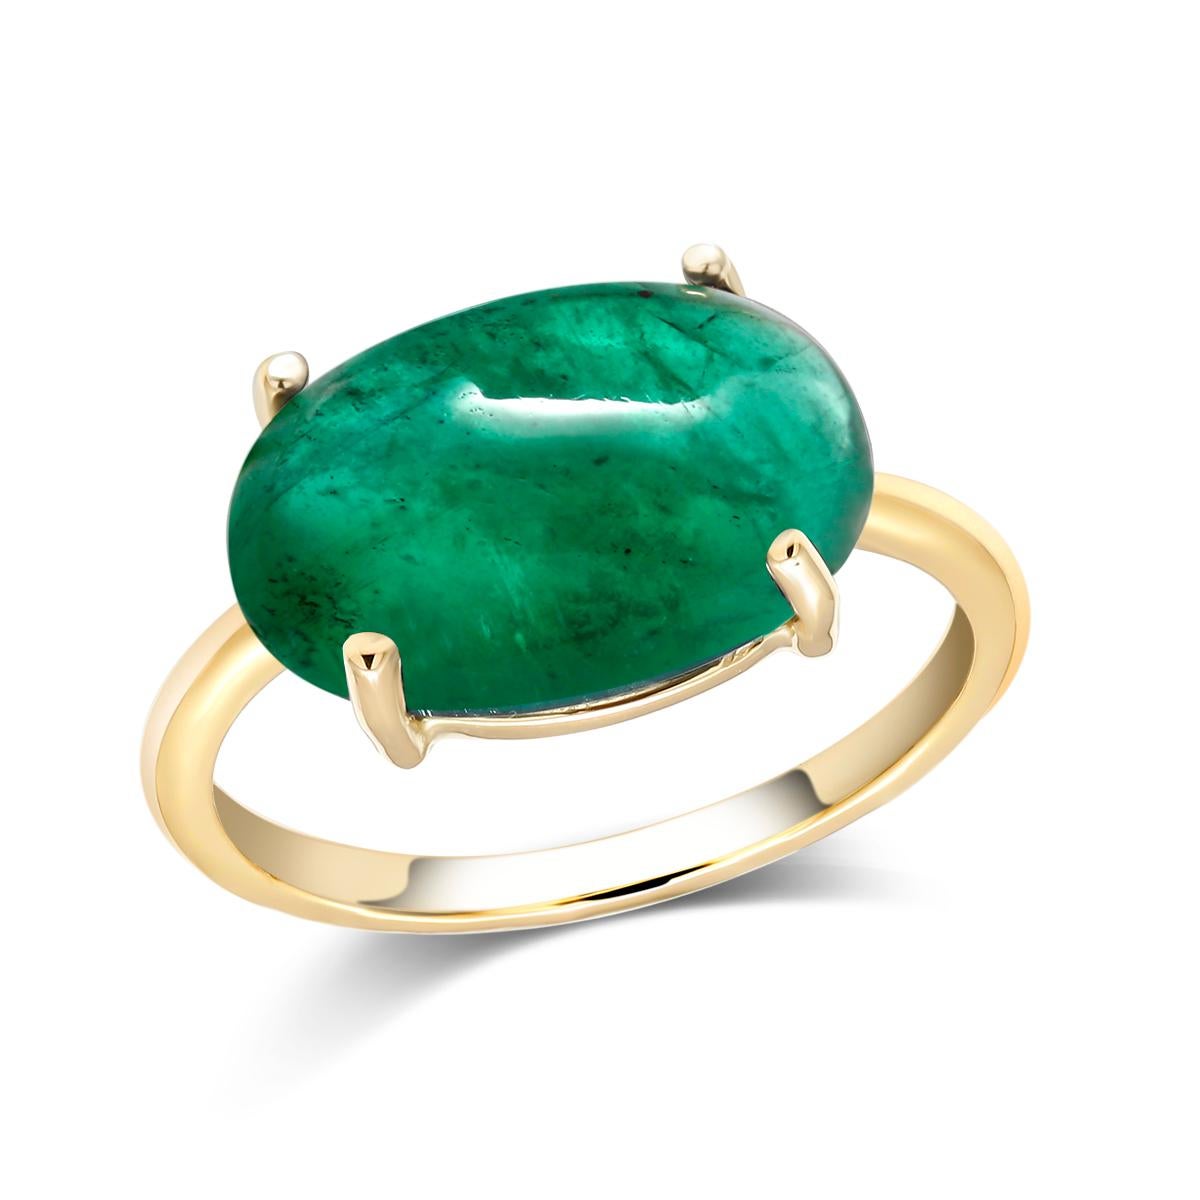 Cabochon Emerald Solitaire Yellow Gold Cocktail Ring Weighing 6.70 Carats 2